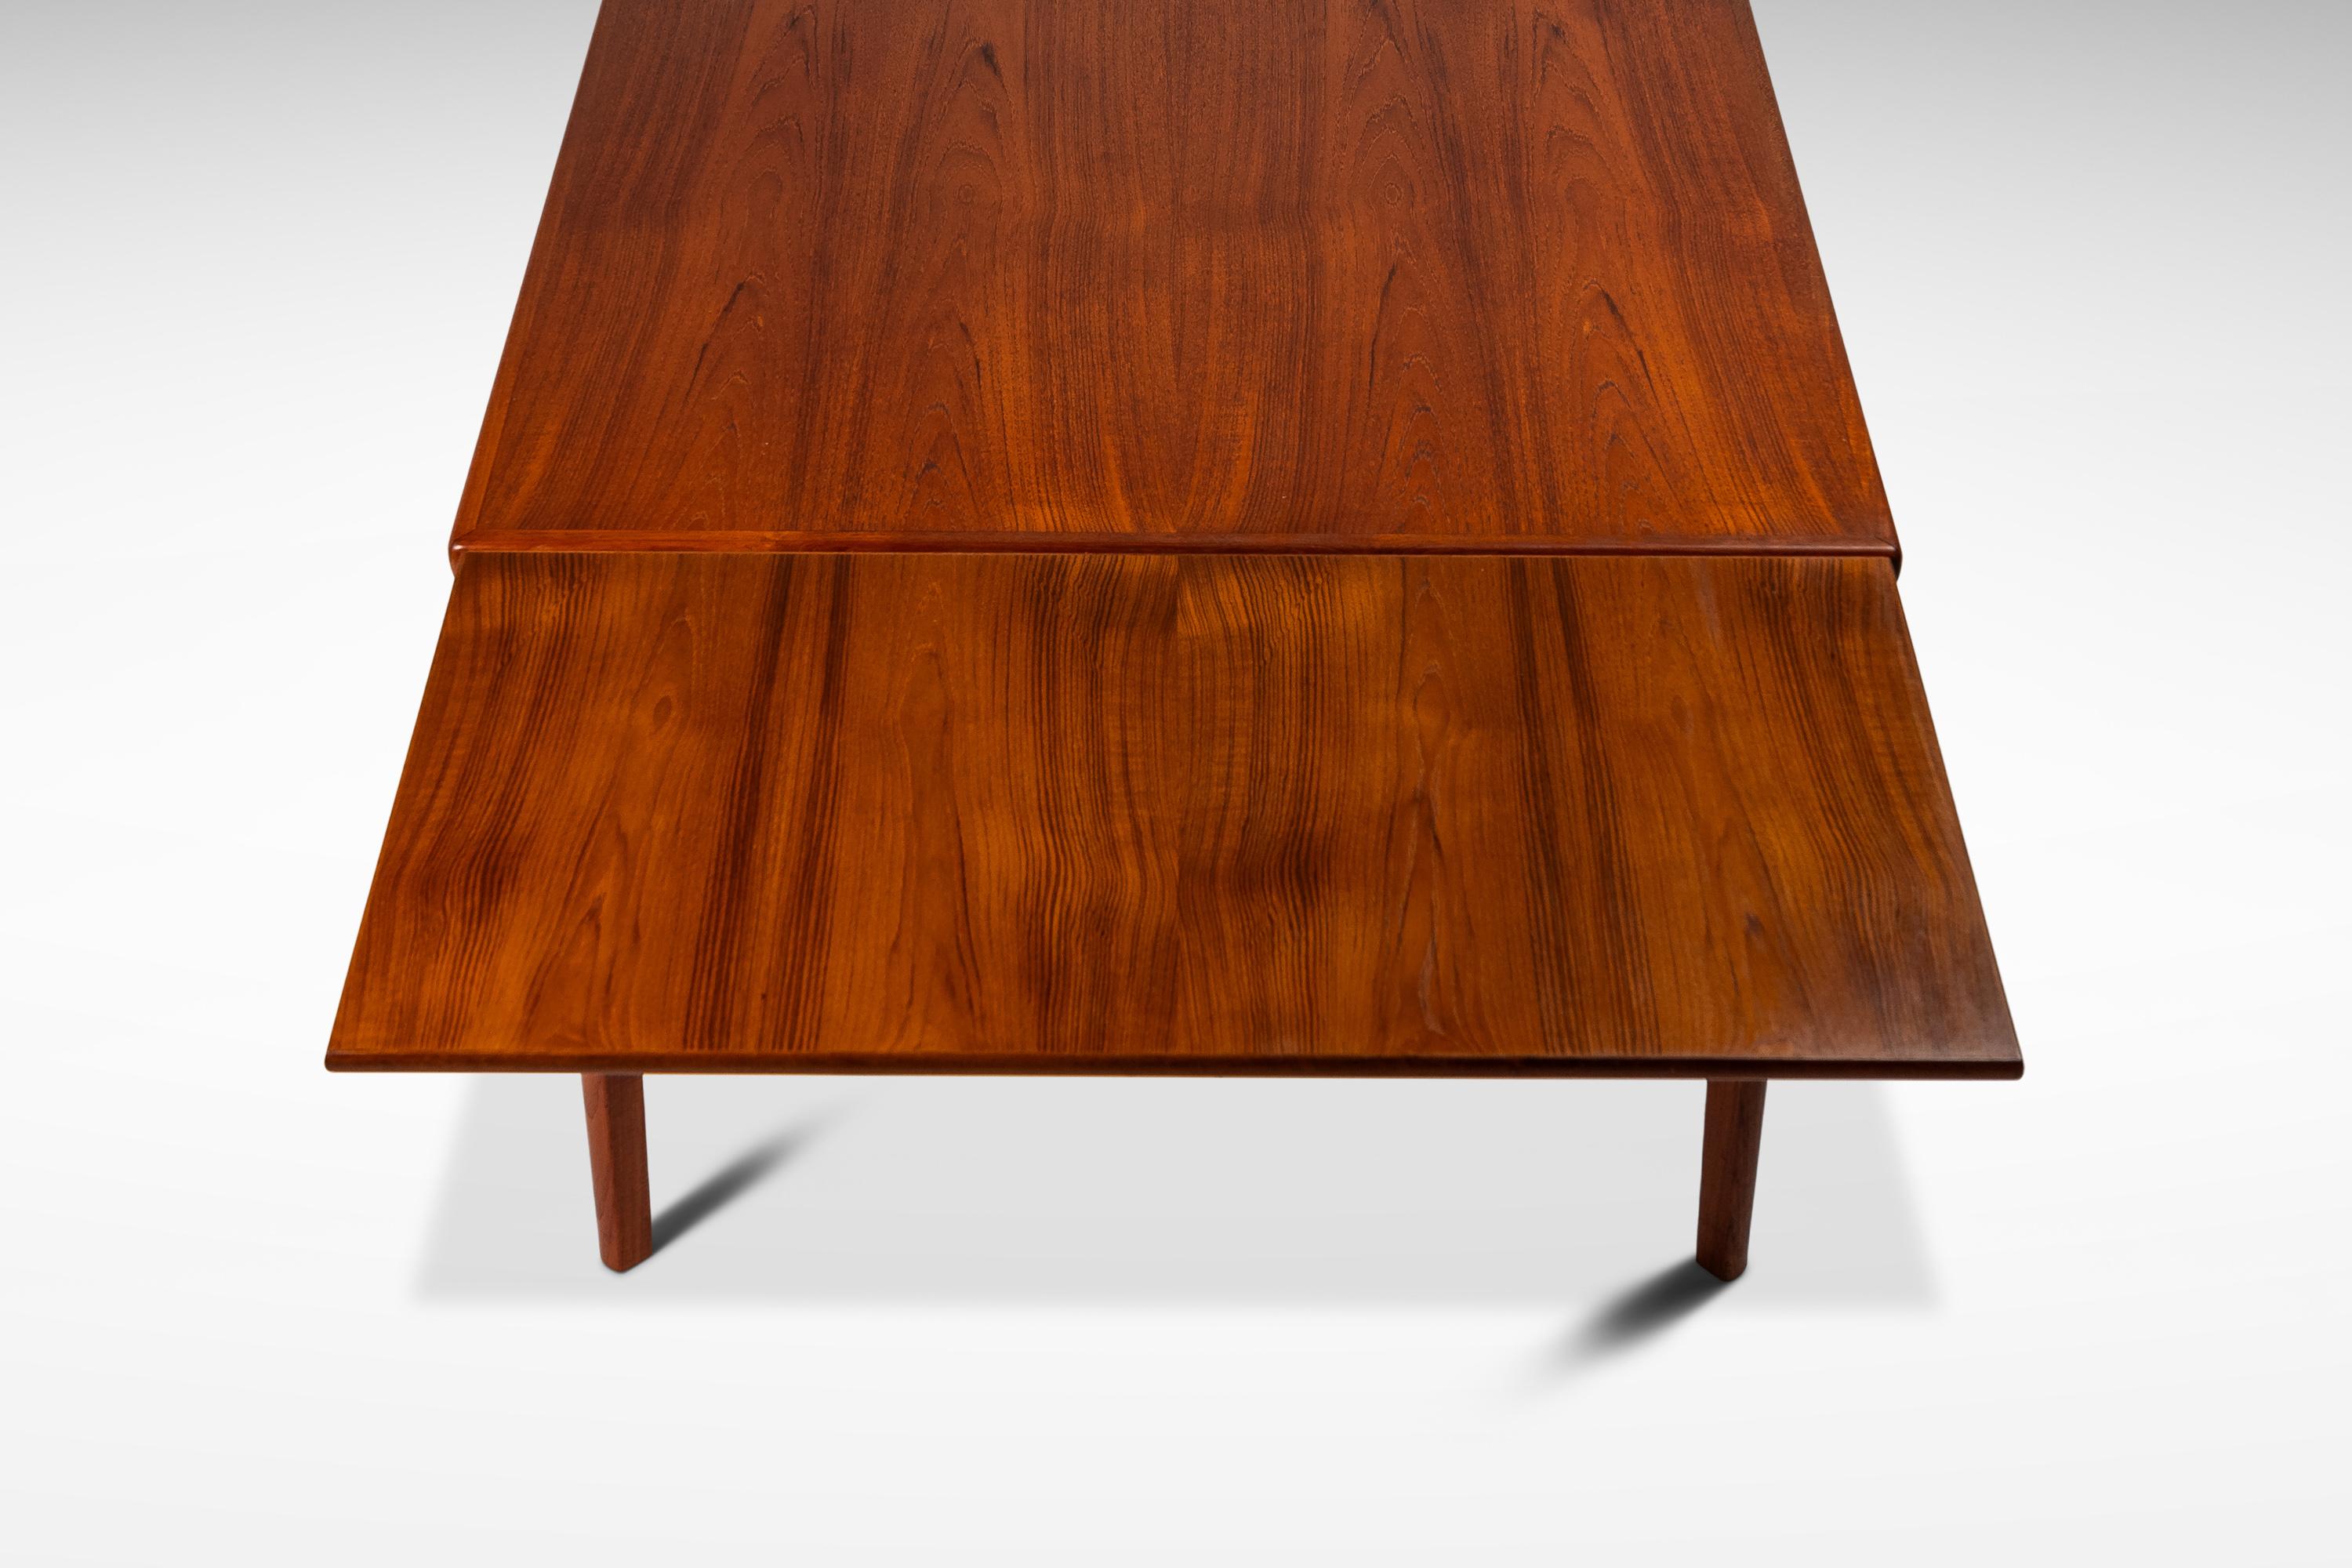 Teak Expansion Dining Table w/ Stow-in Leaves by BRDR Furbo, Denmark, c. 1960s For Sale 3